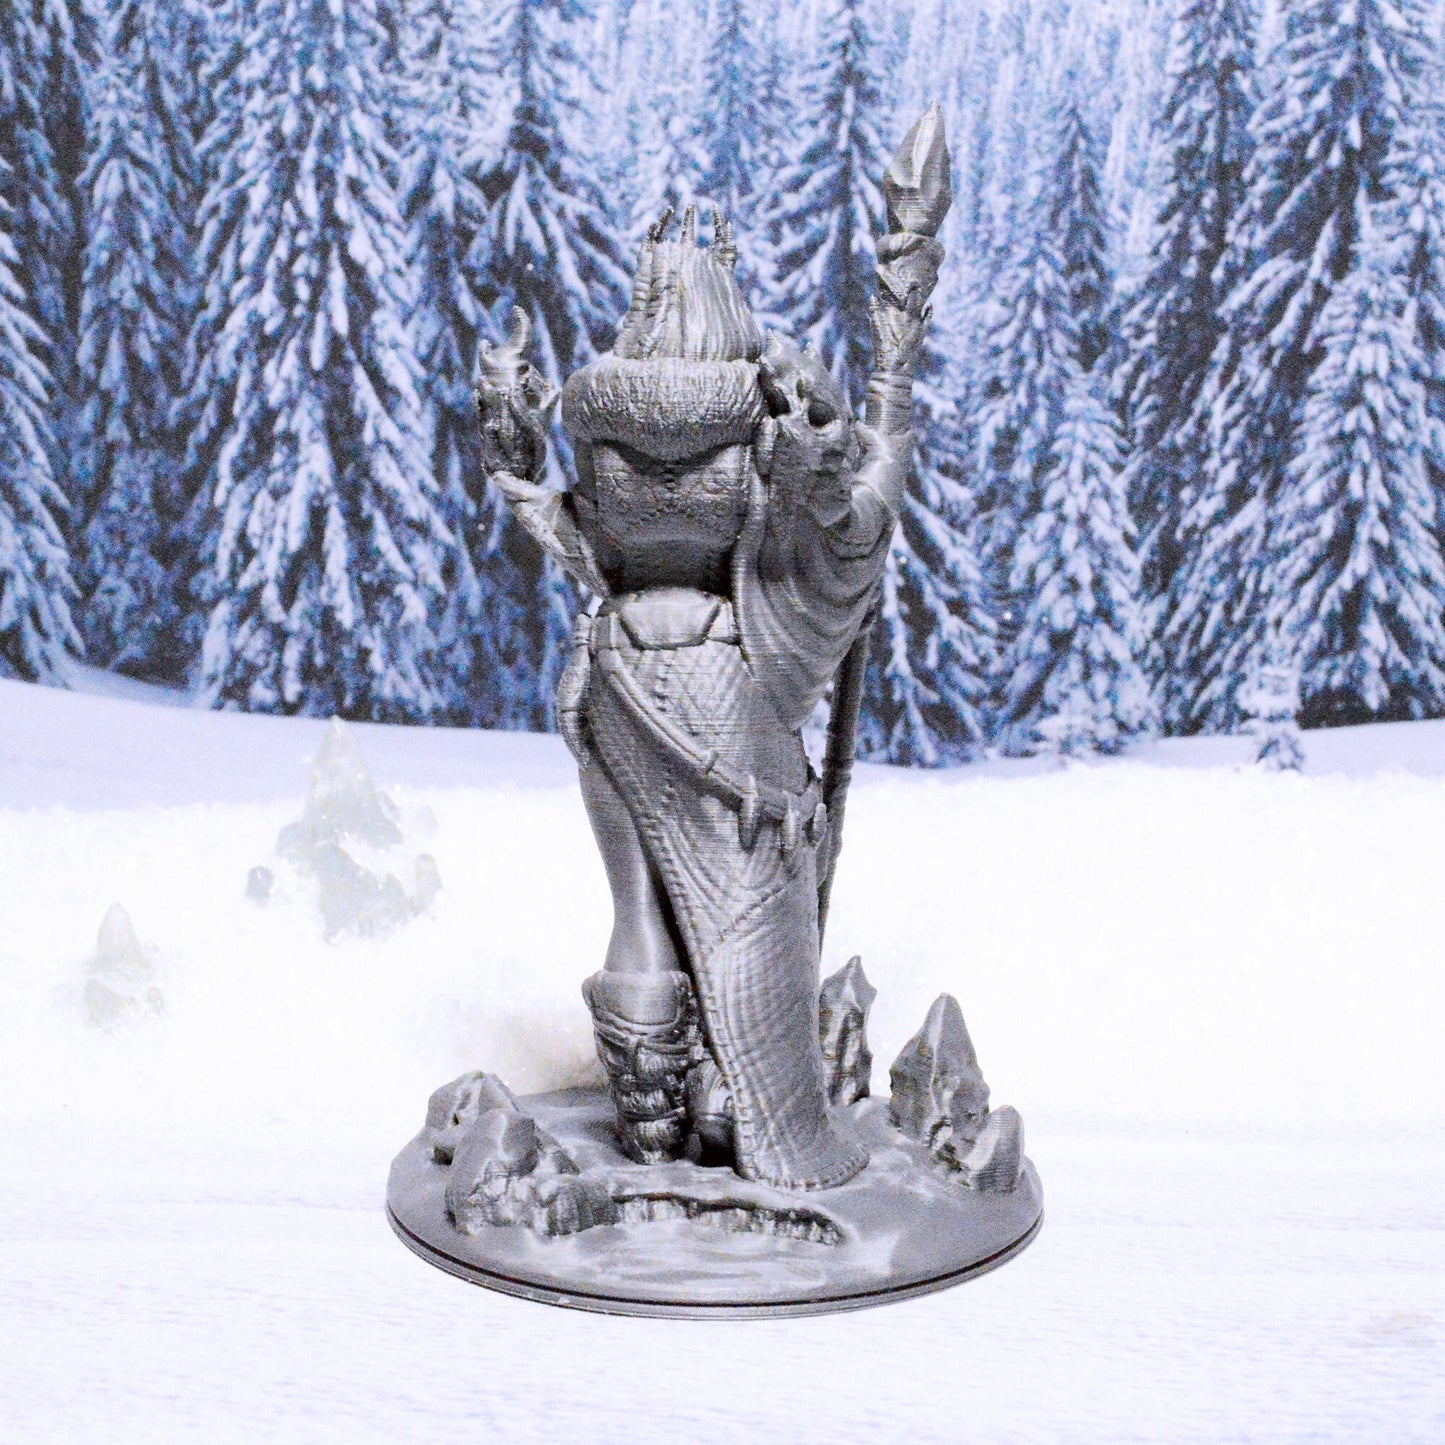 Frost Giant Female 15mm 28mm 32mm for D&D Icewind Dale Miniature, DnD Miniature, Frostgrave Warhammer Pathfinder